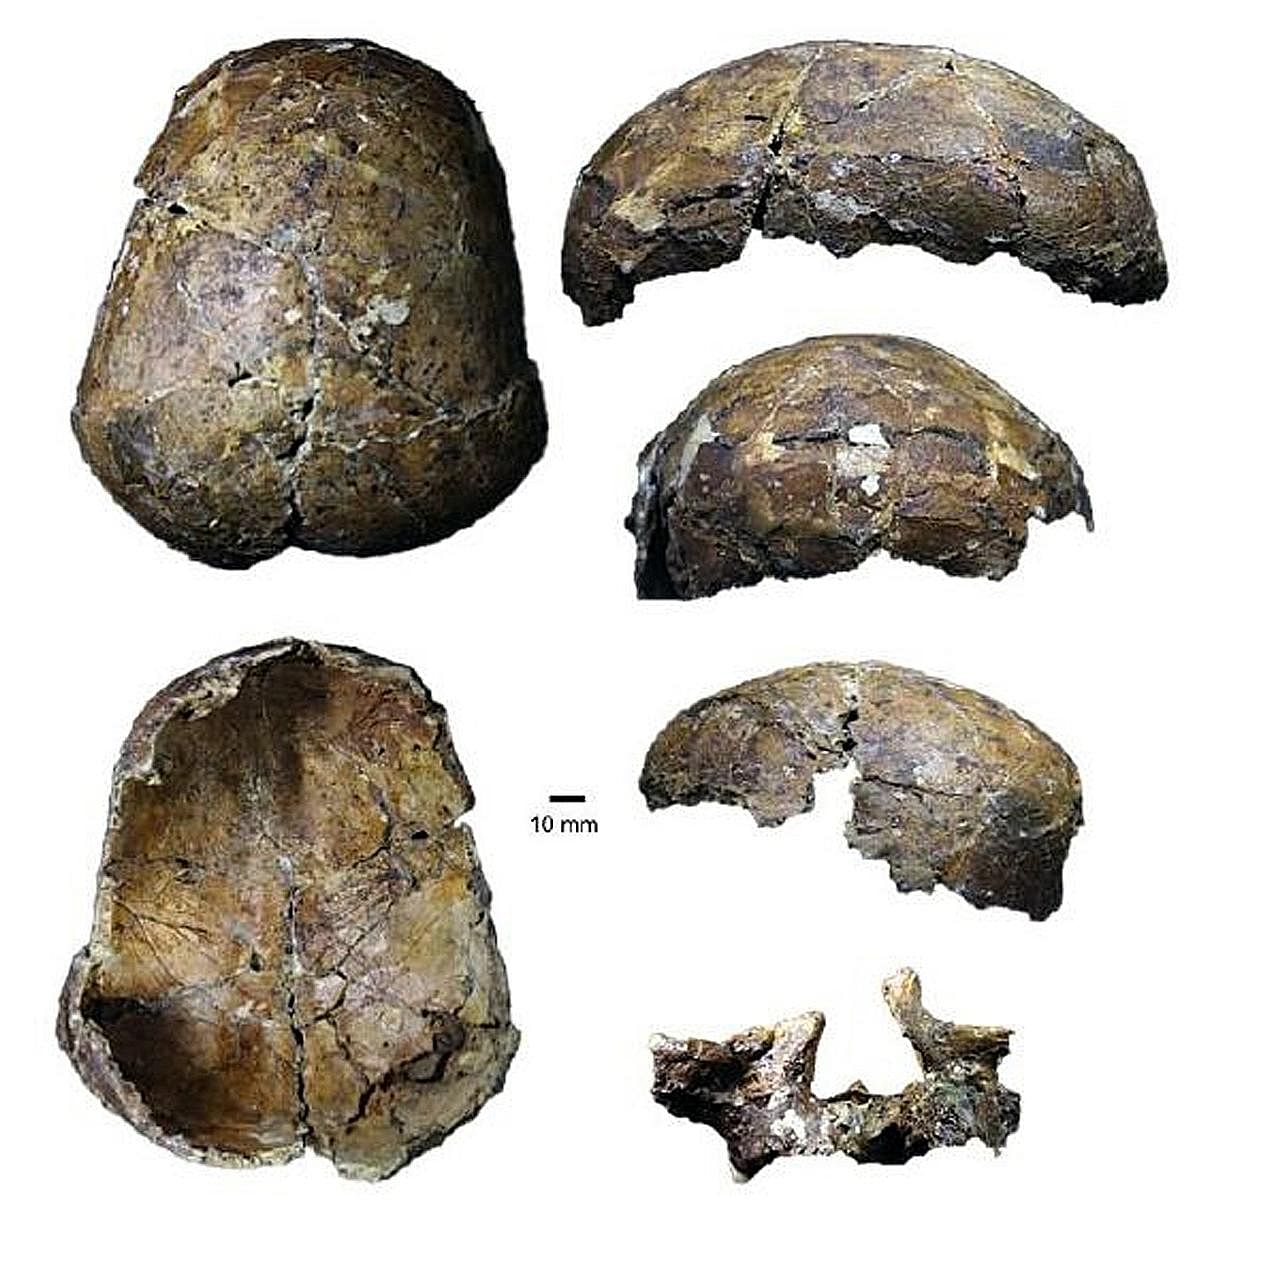 A recent study of the 37,000-year-old Deep Skull is challenging old ideas, including the belief that it belonged to a teenage boy.